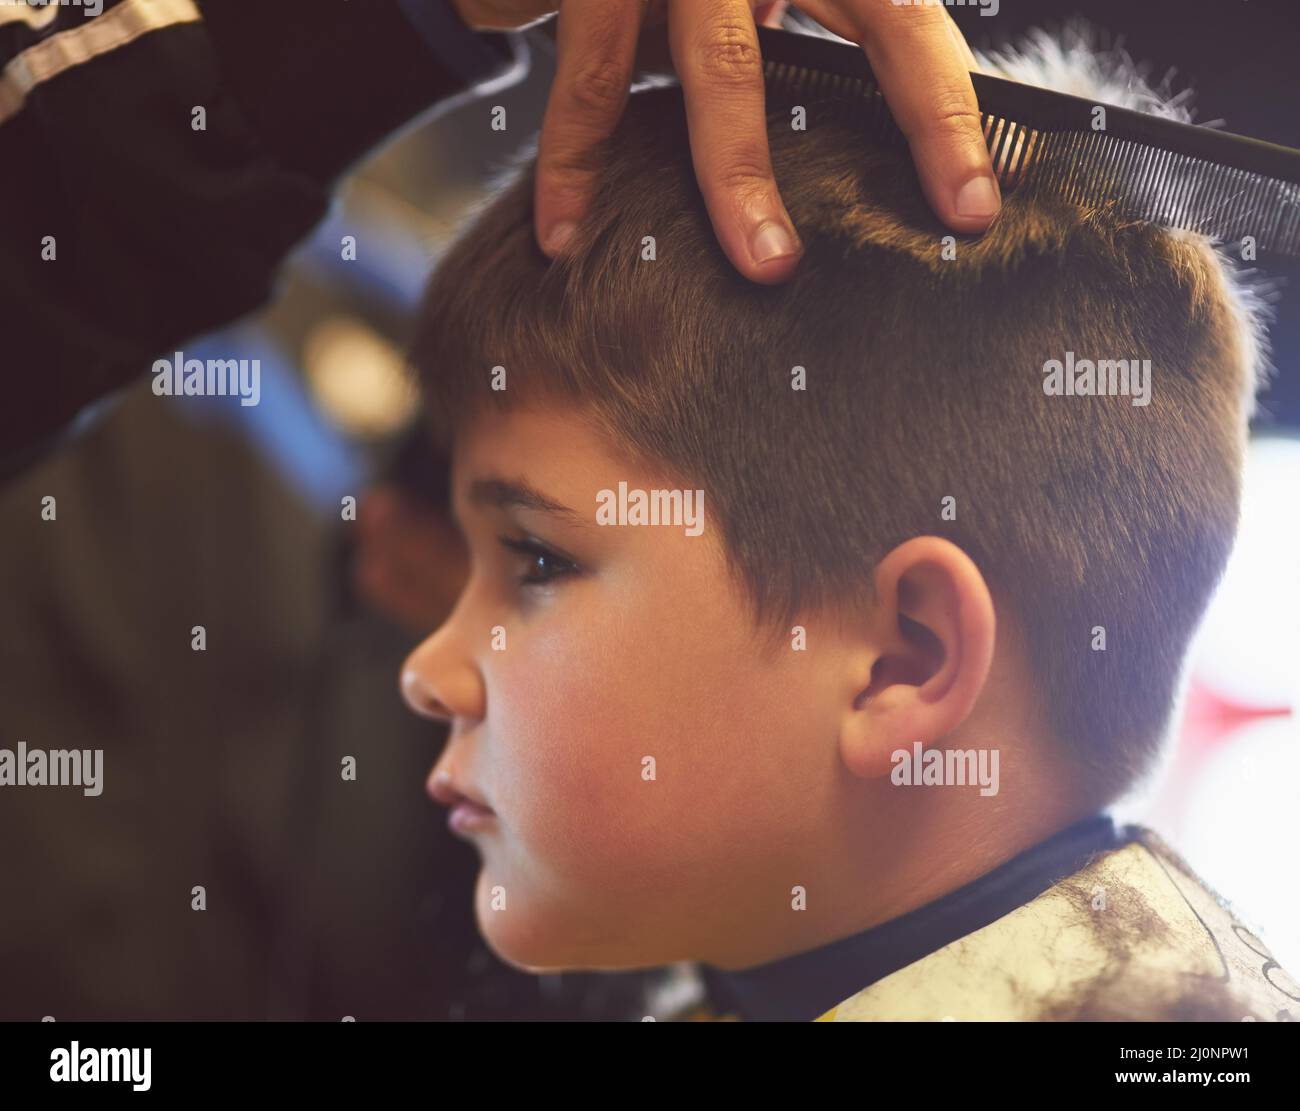 Just a bit of the top please. Closeup shot of a young boy getting a haircut at a barber shop. Stock Photo